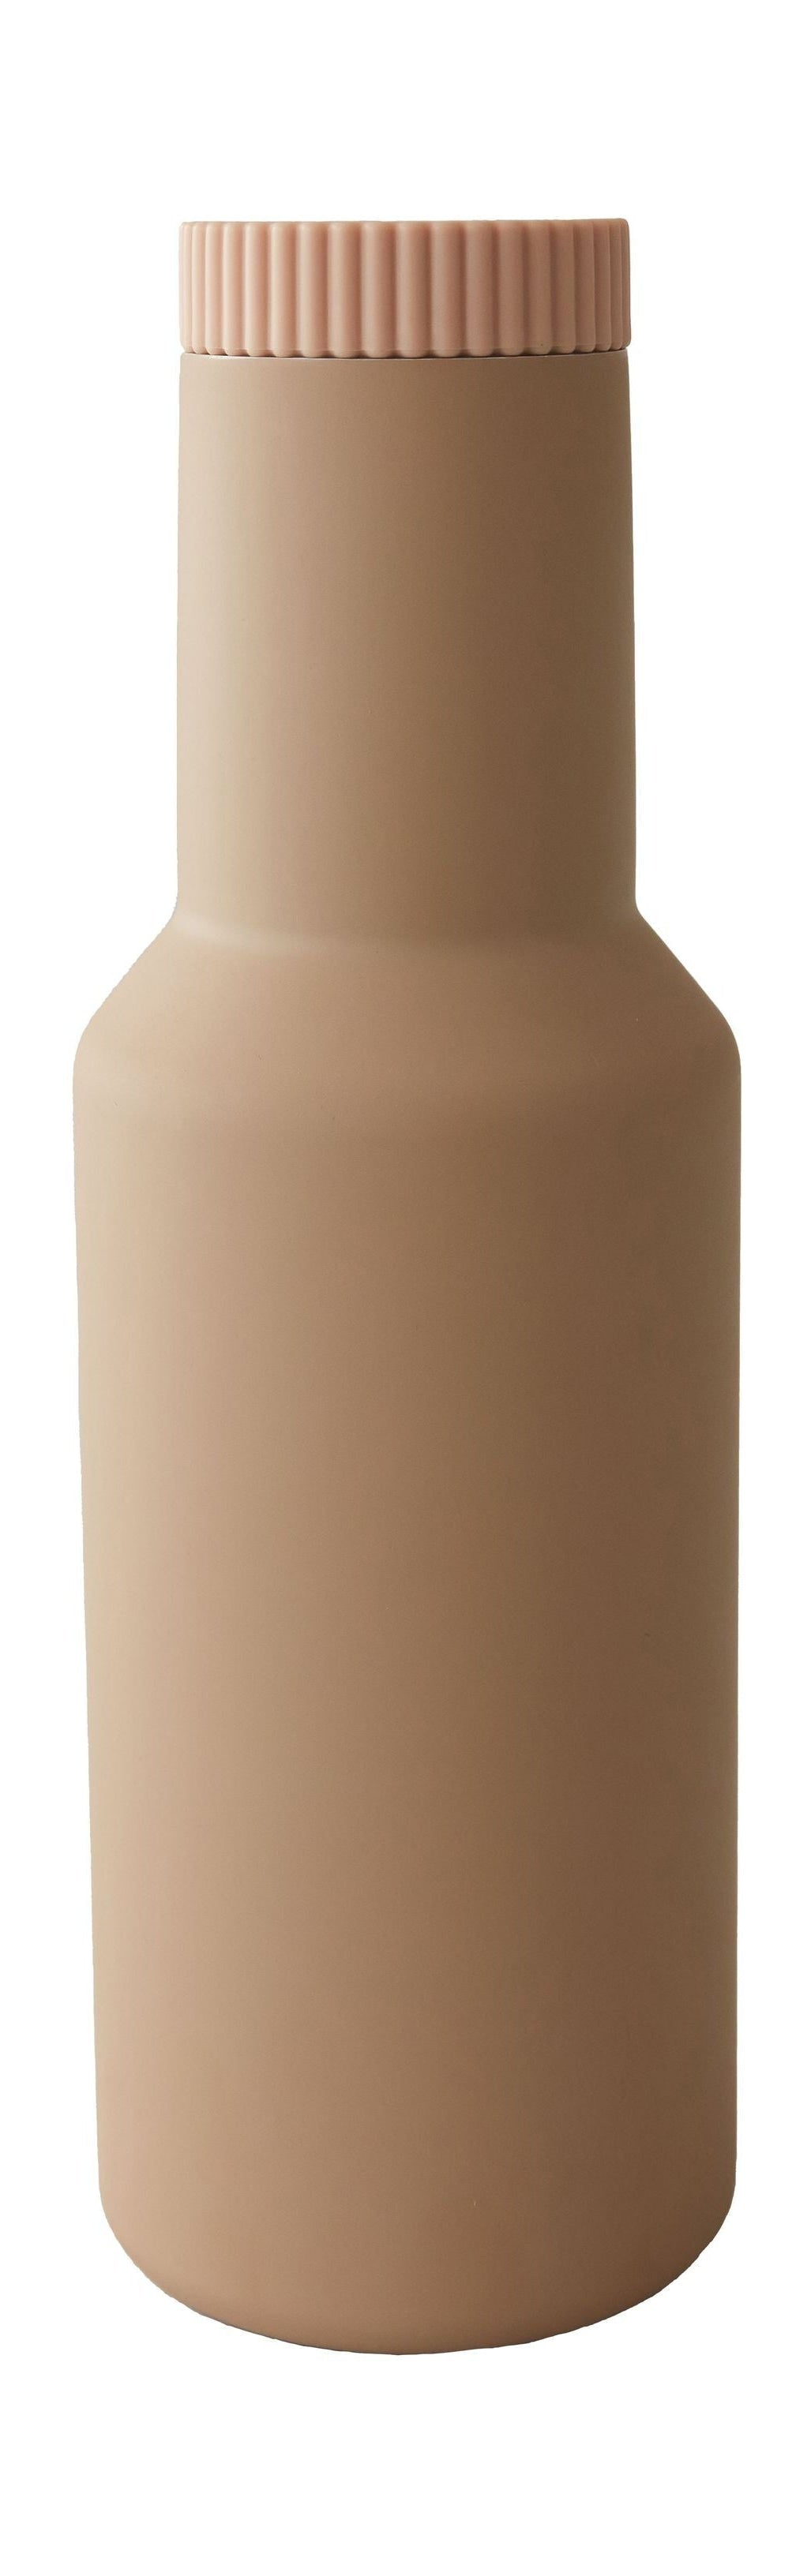 Design Letters Tube Thermos Jannic, Beige